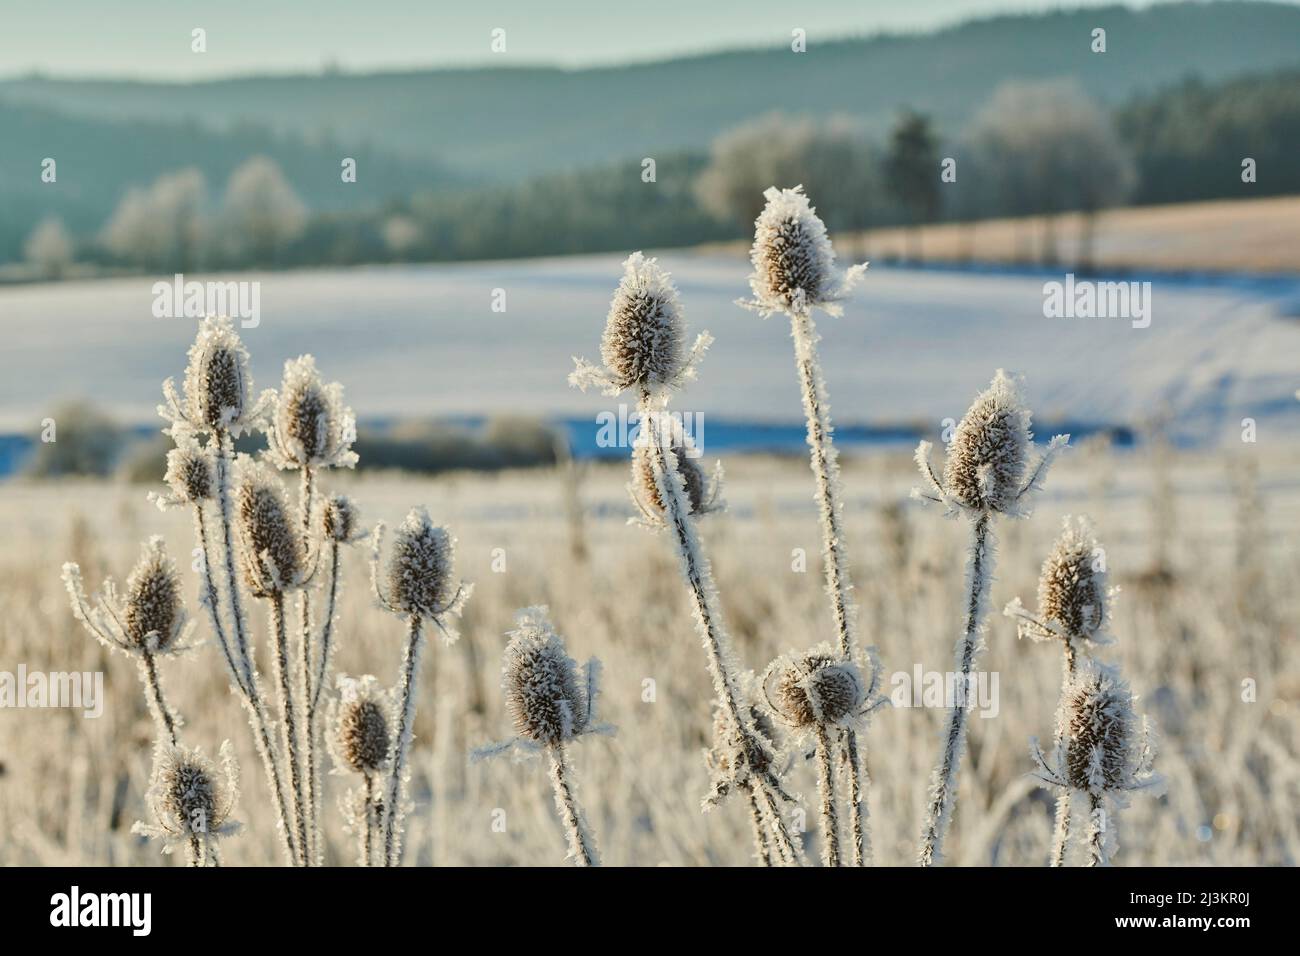 Frozen Indian teasel (Dipsacus sativus) on a field; Bavaria, Germany Stock Photo